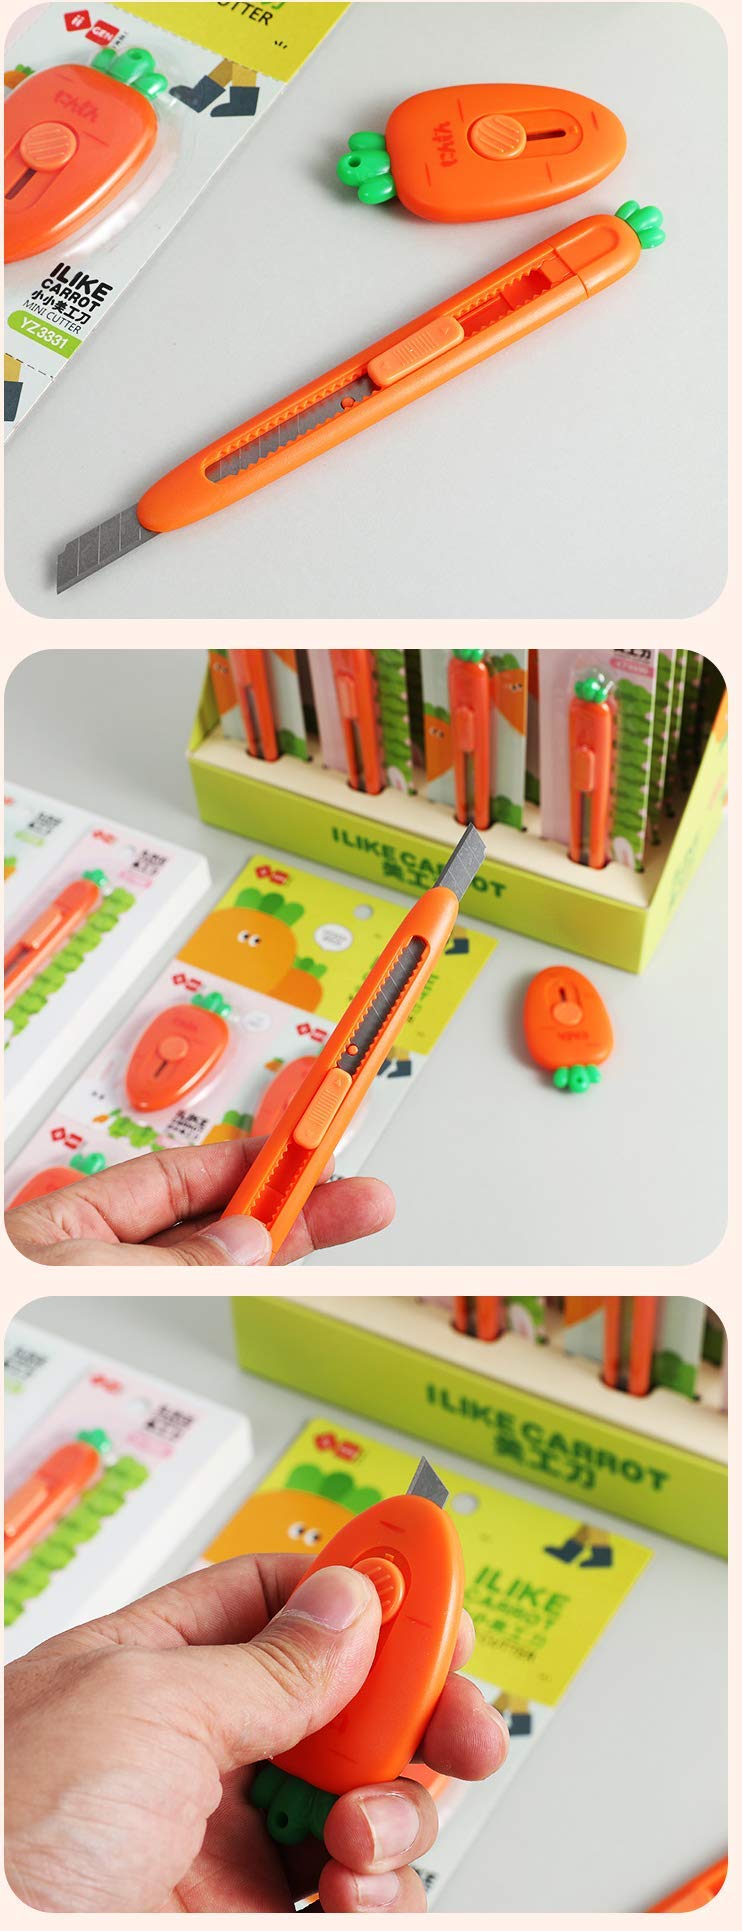  [AUSTRALIA] - Chris.W Set of 4 Mini Retractable Utility Knife Box Cutter Letter Opener, Cute Carrot and Strawberry Shaped Portable Knivies